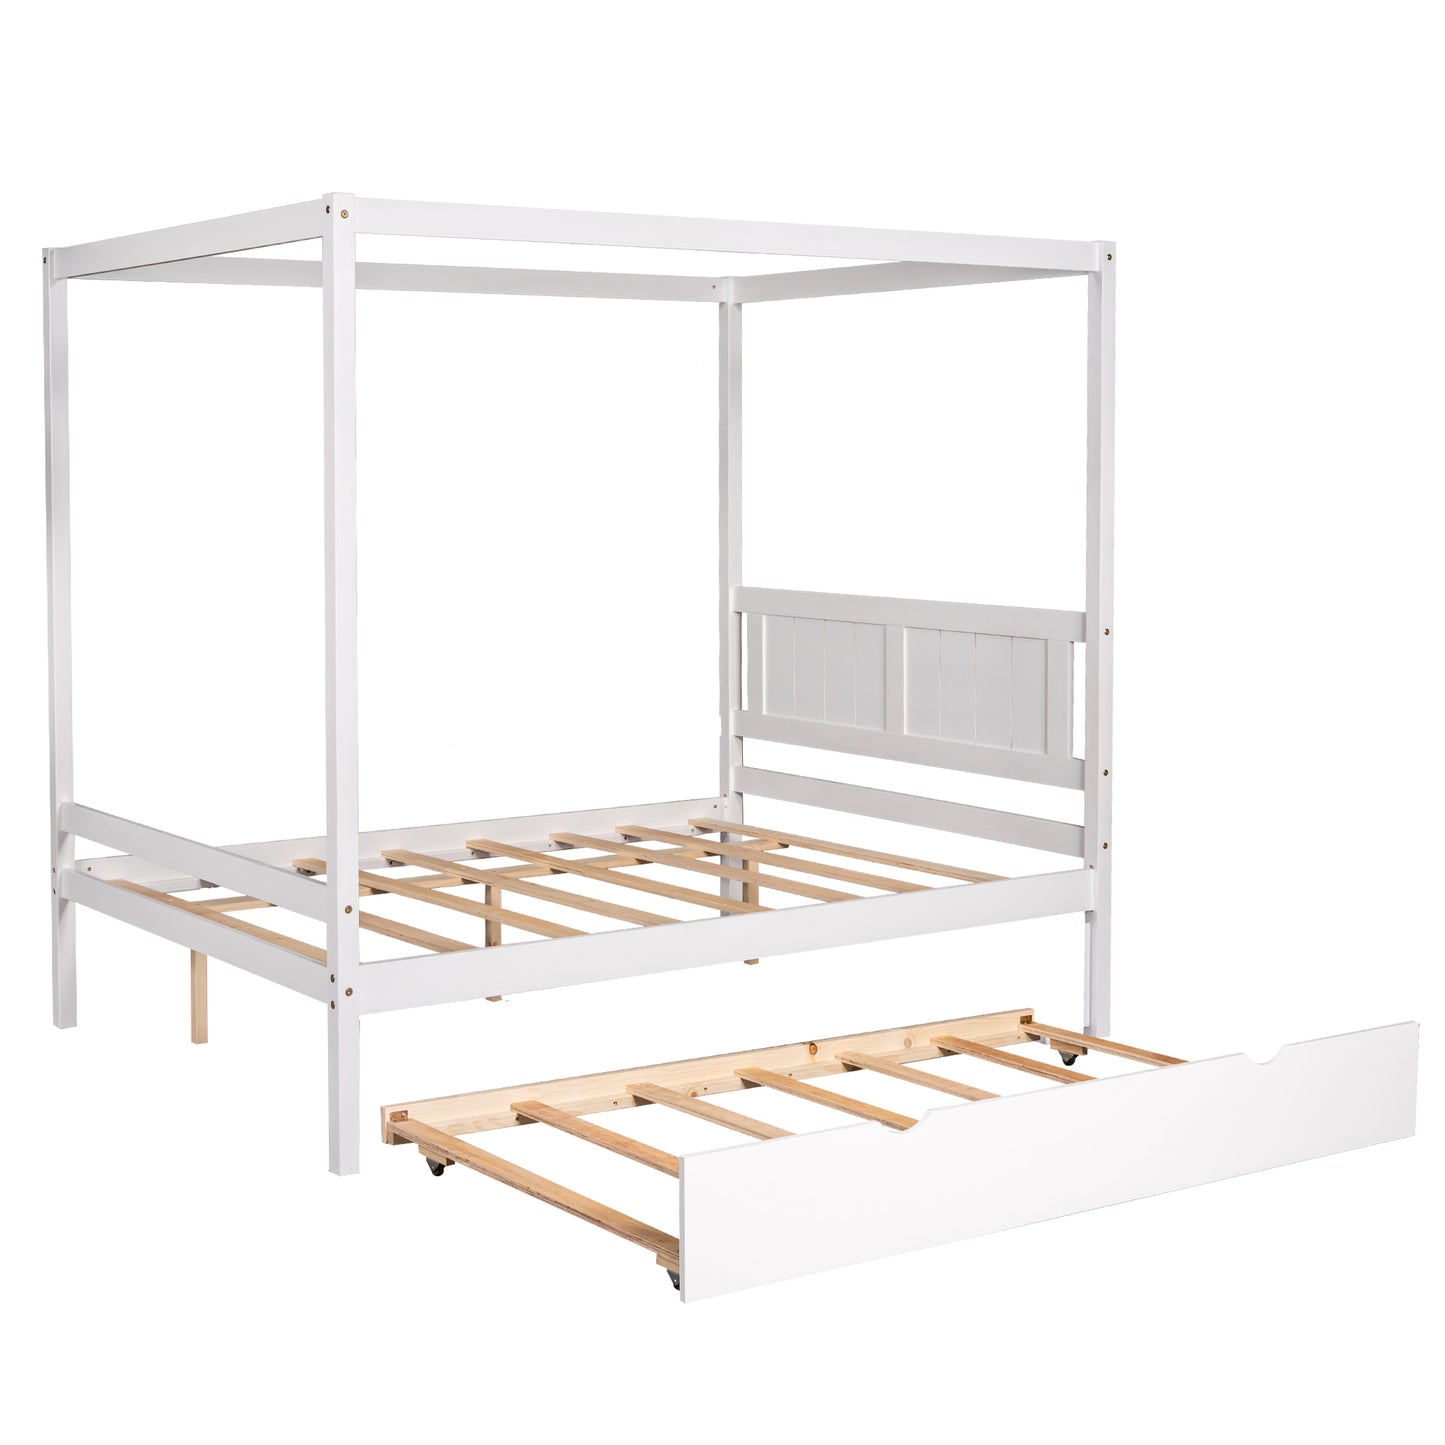 Full Size Canopy Platform Bed with Trundle,With Slat Support Leg,White